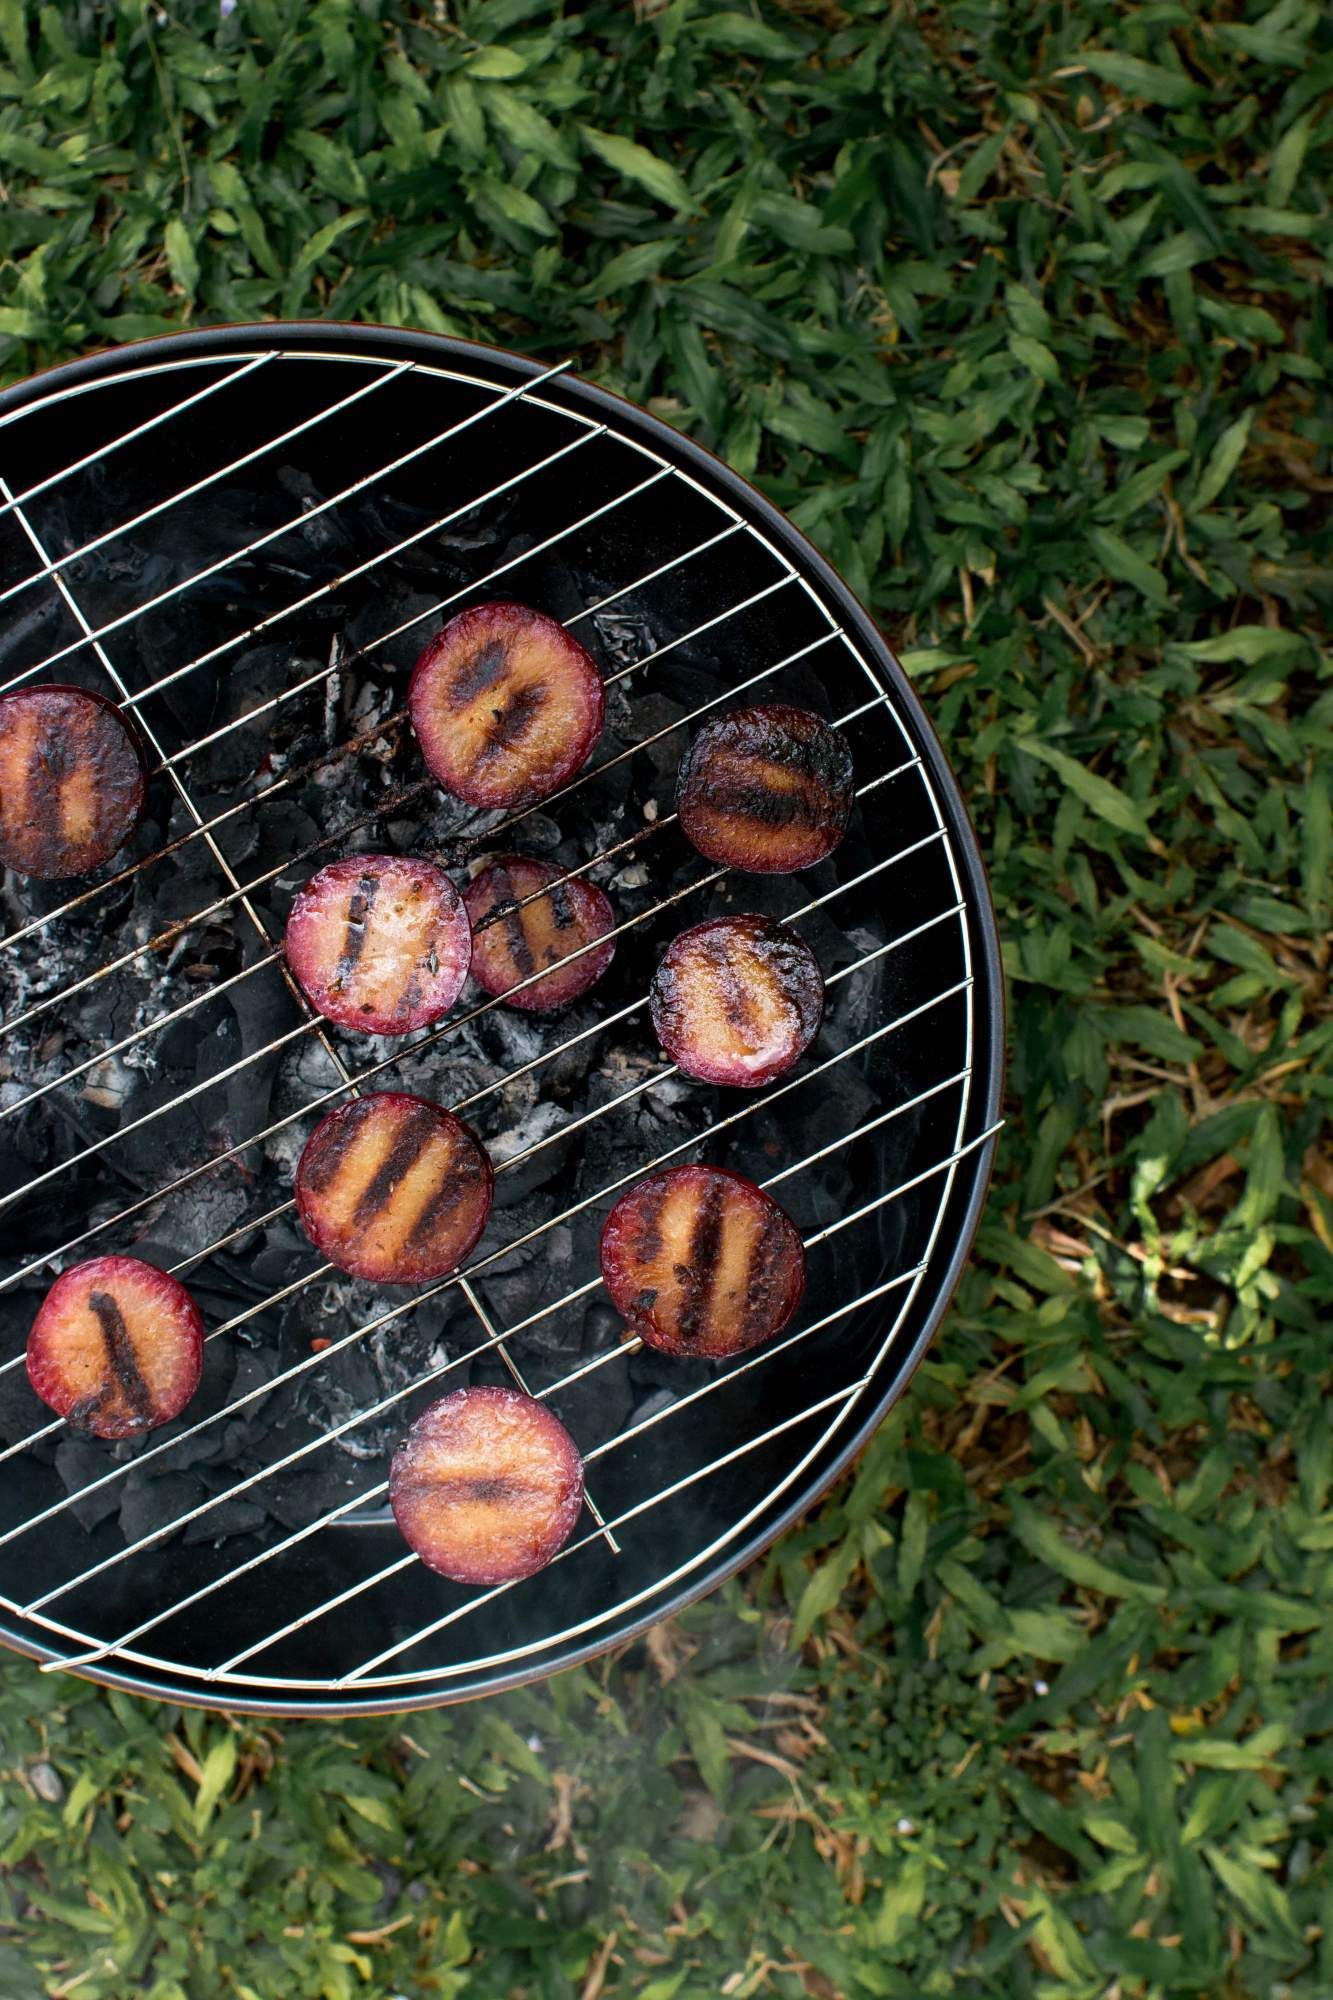 Plums on a grill with grill marks being cooked for a salad.